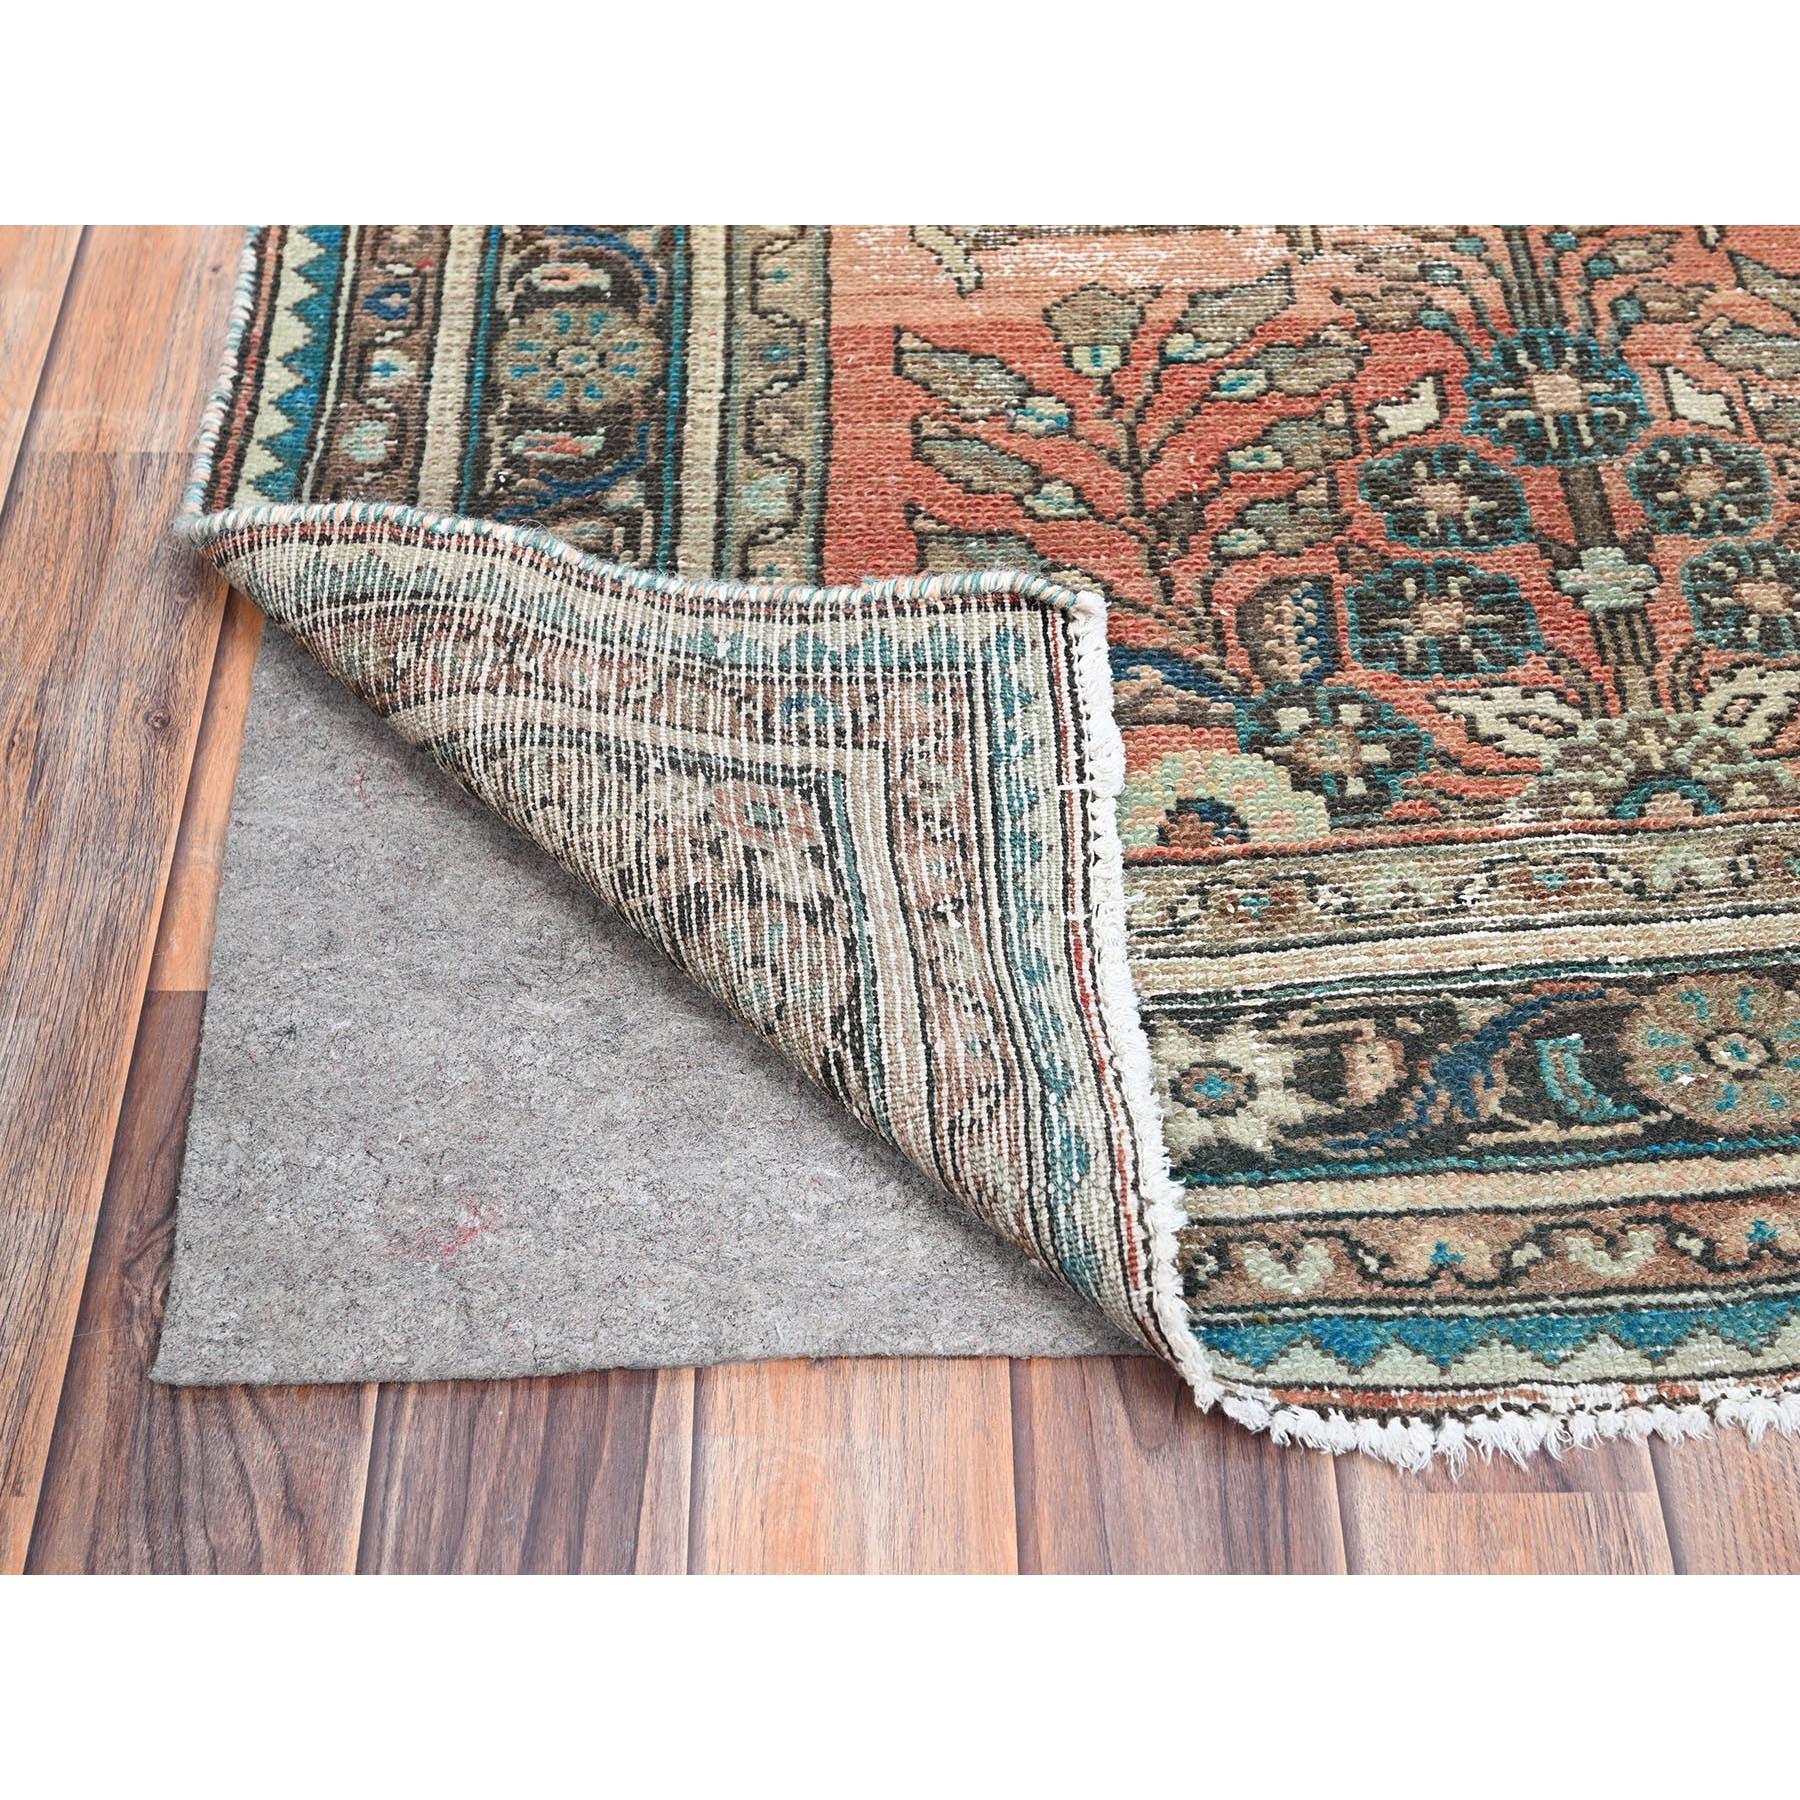 Hand-Knotted Red Soft Wool Sunset Colors Vintage Persian Lilahan Distressed Clean Runner Rug